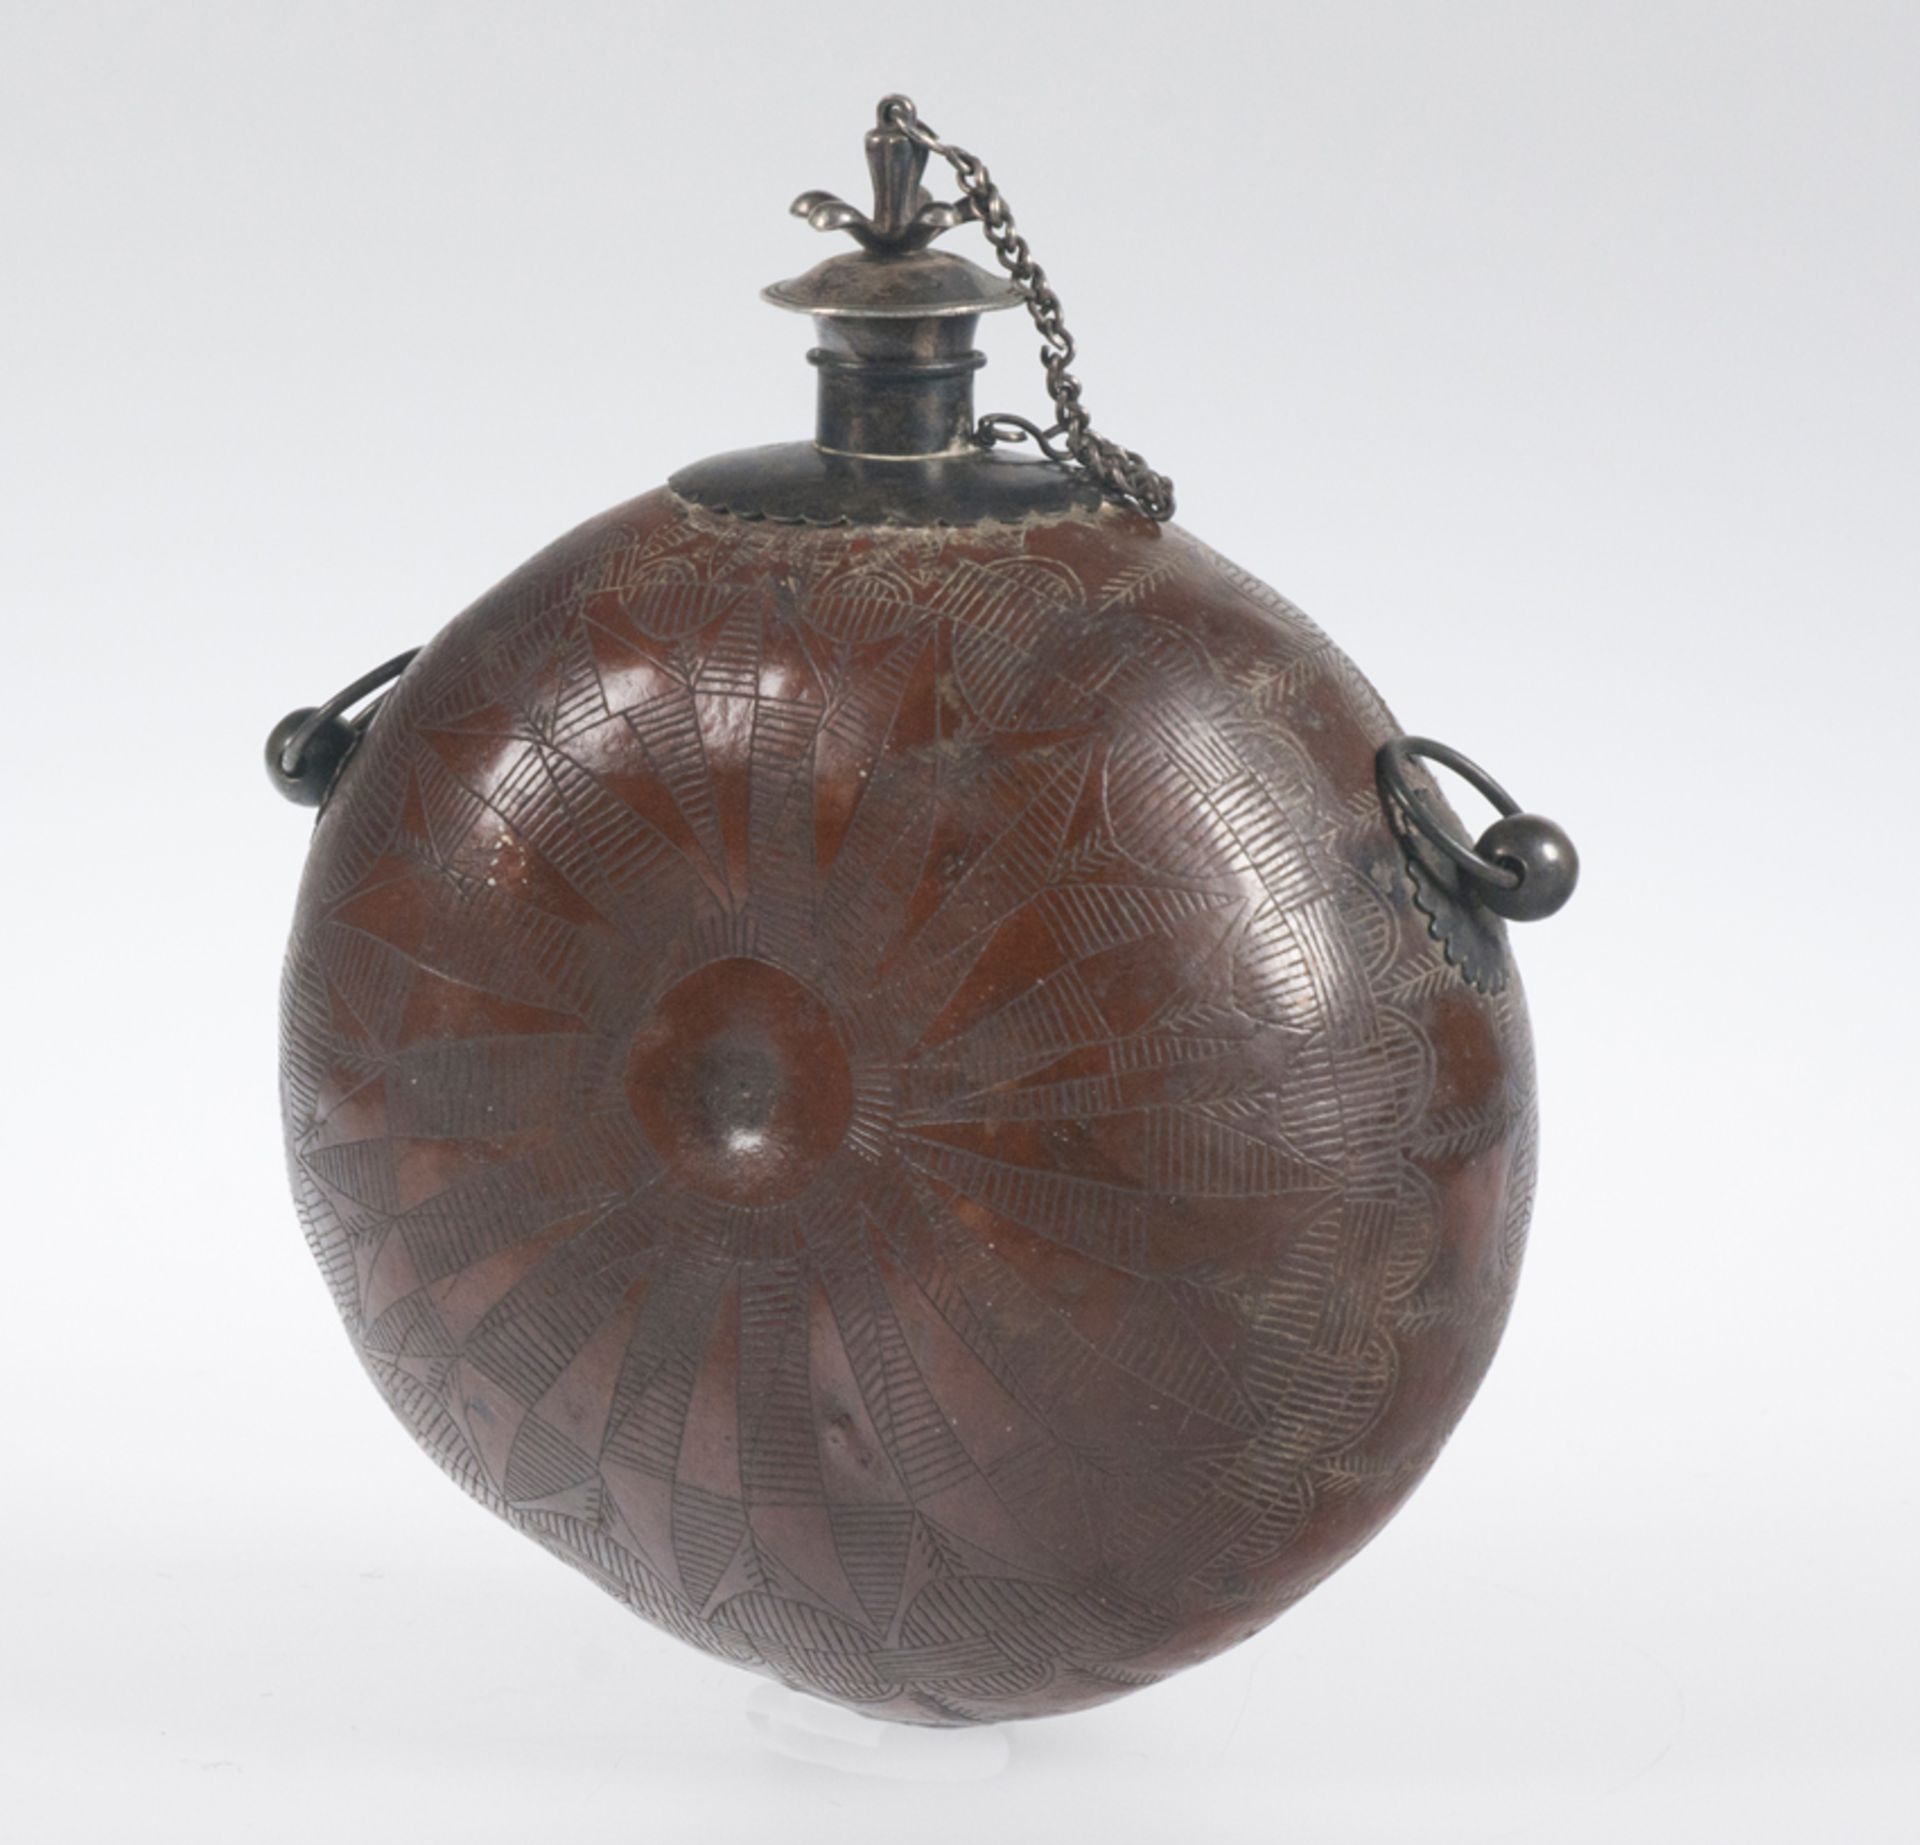 Canteen. Engraved gourd with silver applications. Colonial work. Mexico or Peru. 18th century. - Image 4 of 5